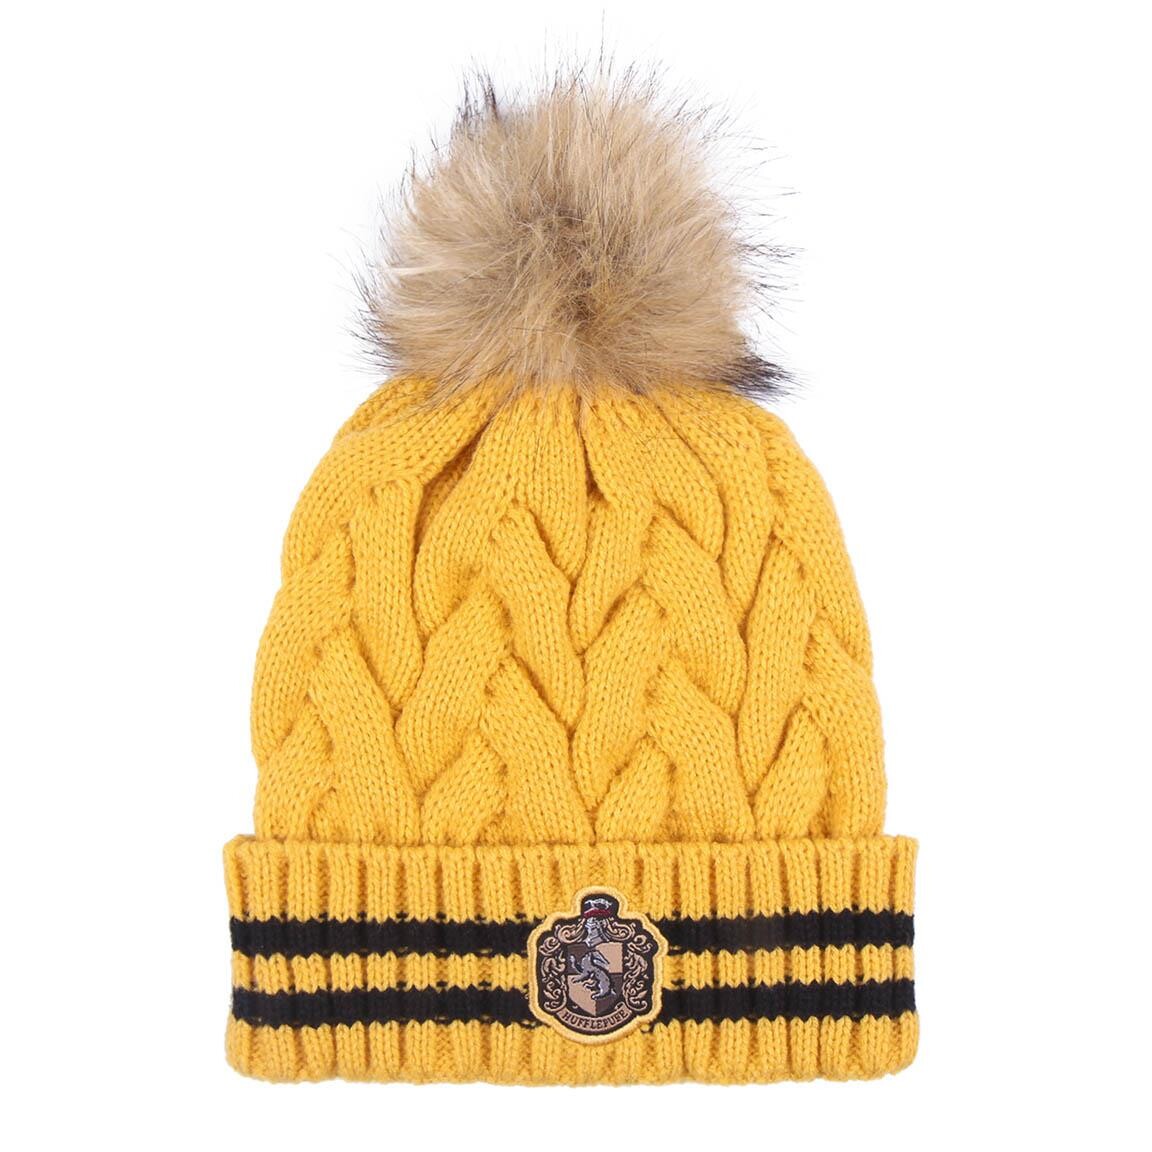 Harry Potter - Hufflepuff | Clothes and accessories for merchandise fans